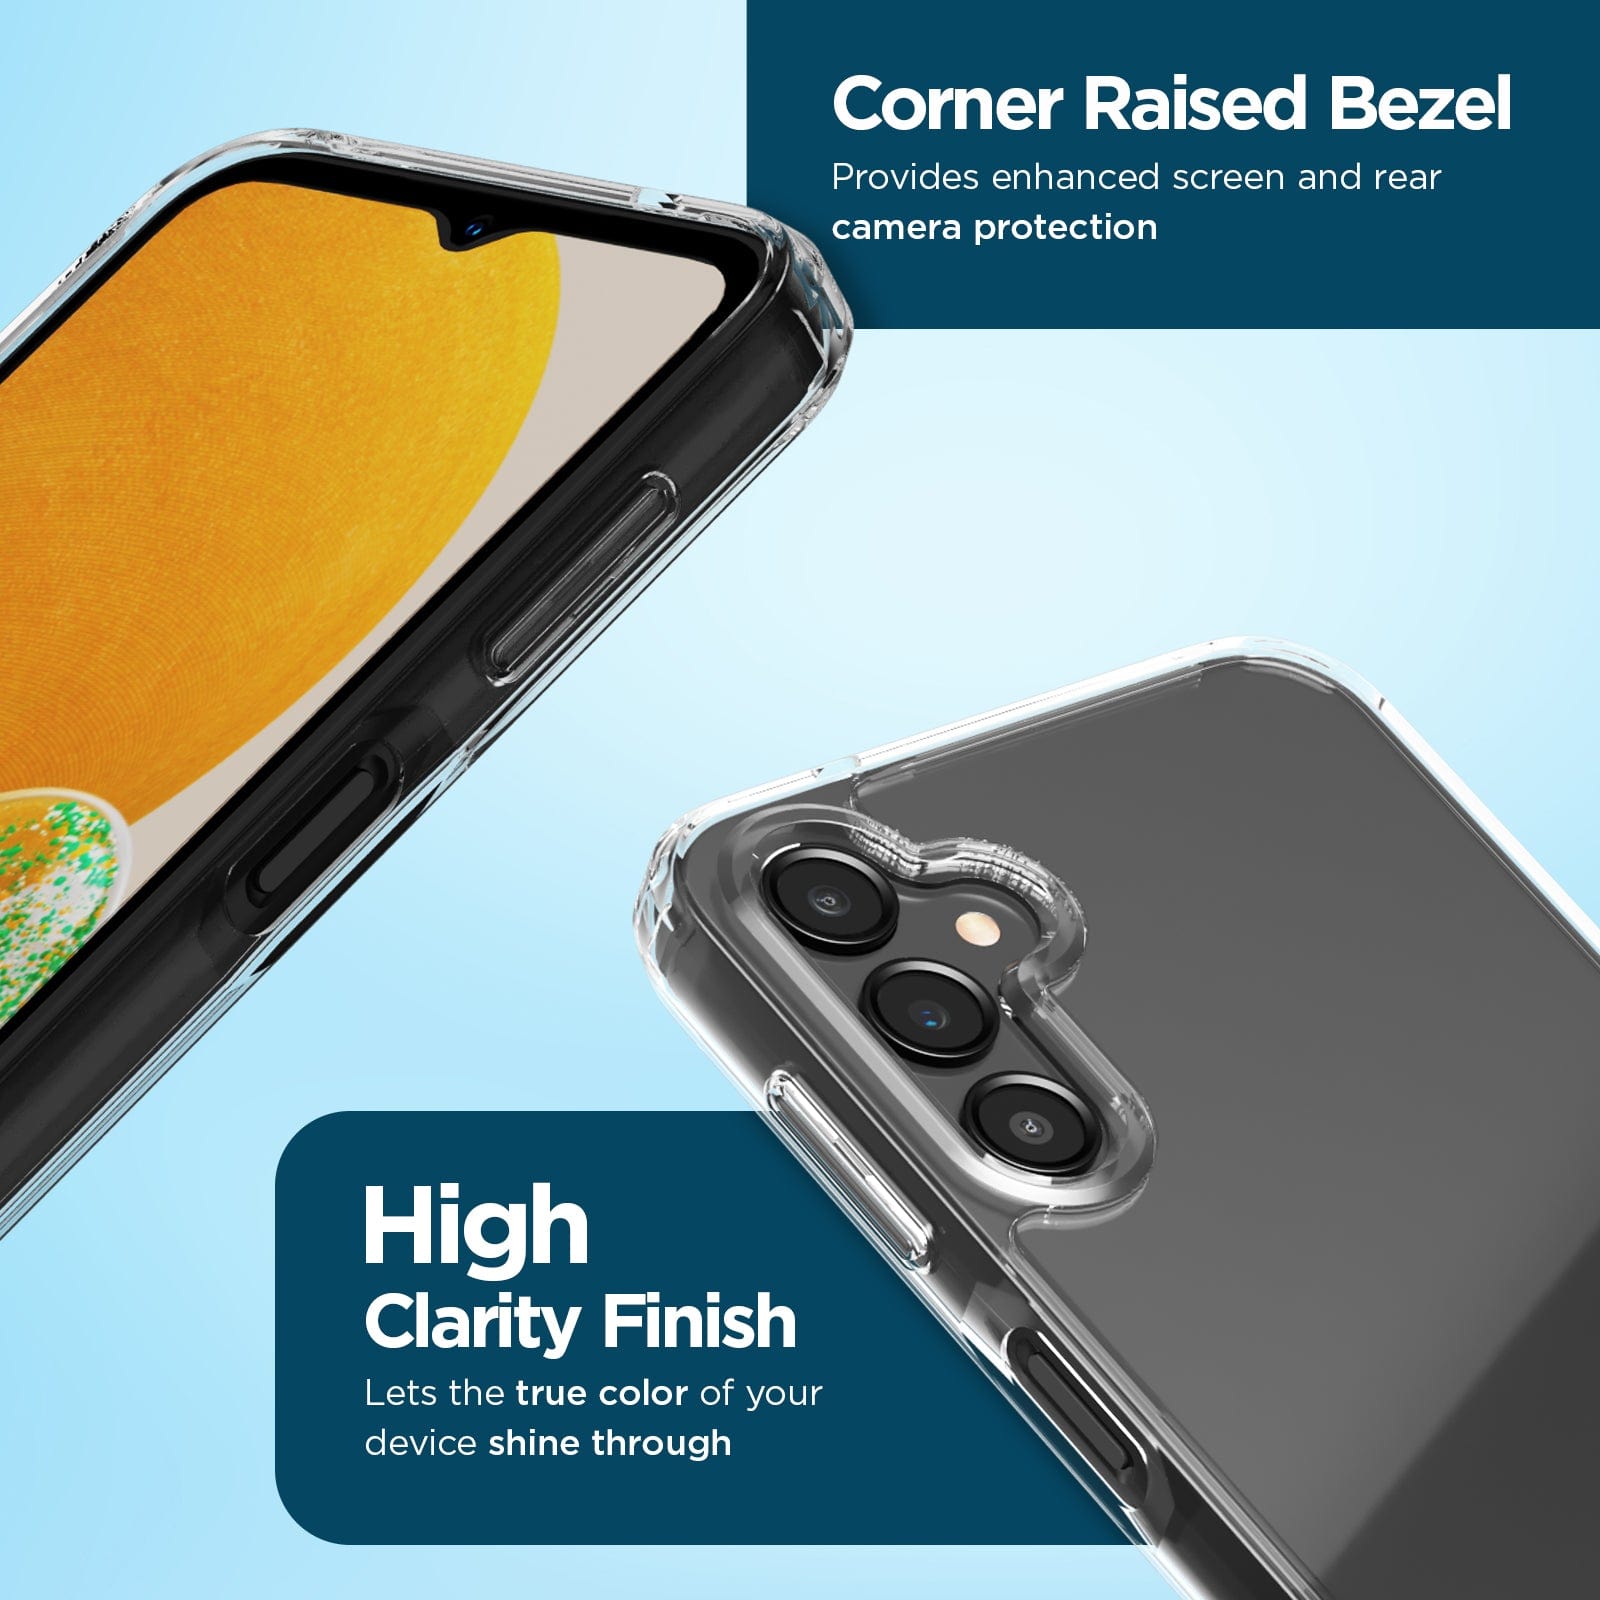 CORNER RAISED BEZEL PROVIDES ENHANCED SCREEN AND REAR CAMERA PROTECTION. HIGH CLARITY FINISH LETS THE TRUE COLOR OF YOUR DEVICE SHINE THROUGH